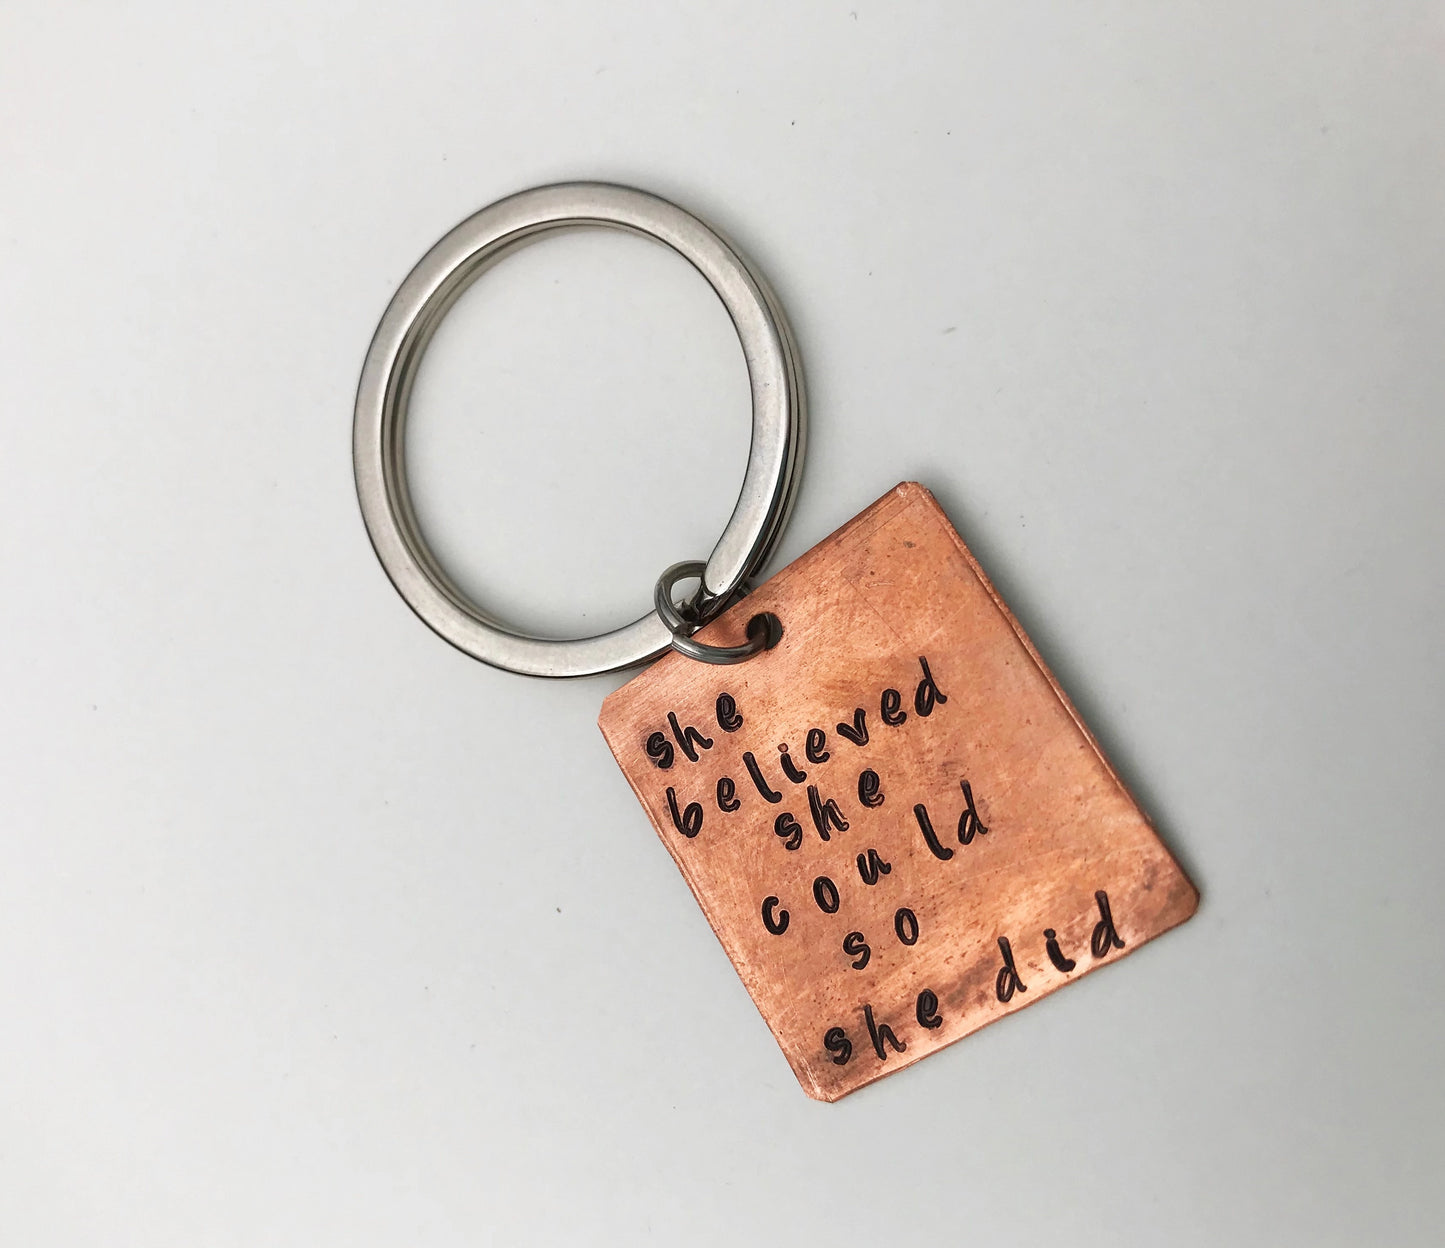 She believed she could handstamp key chain